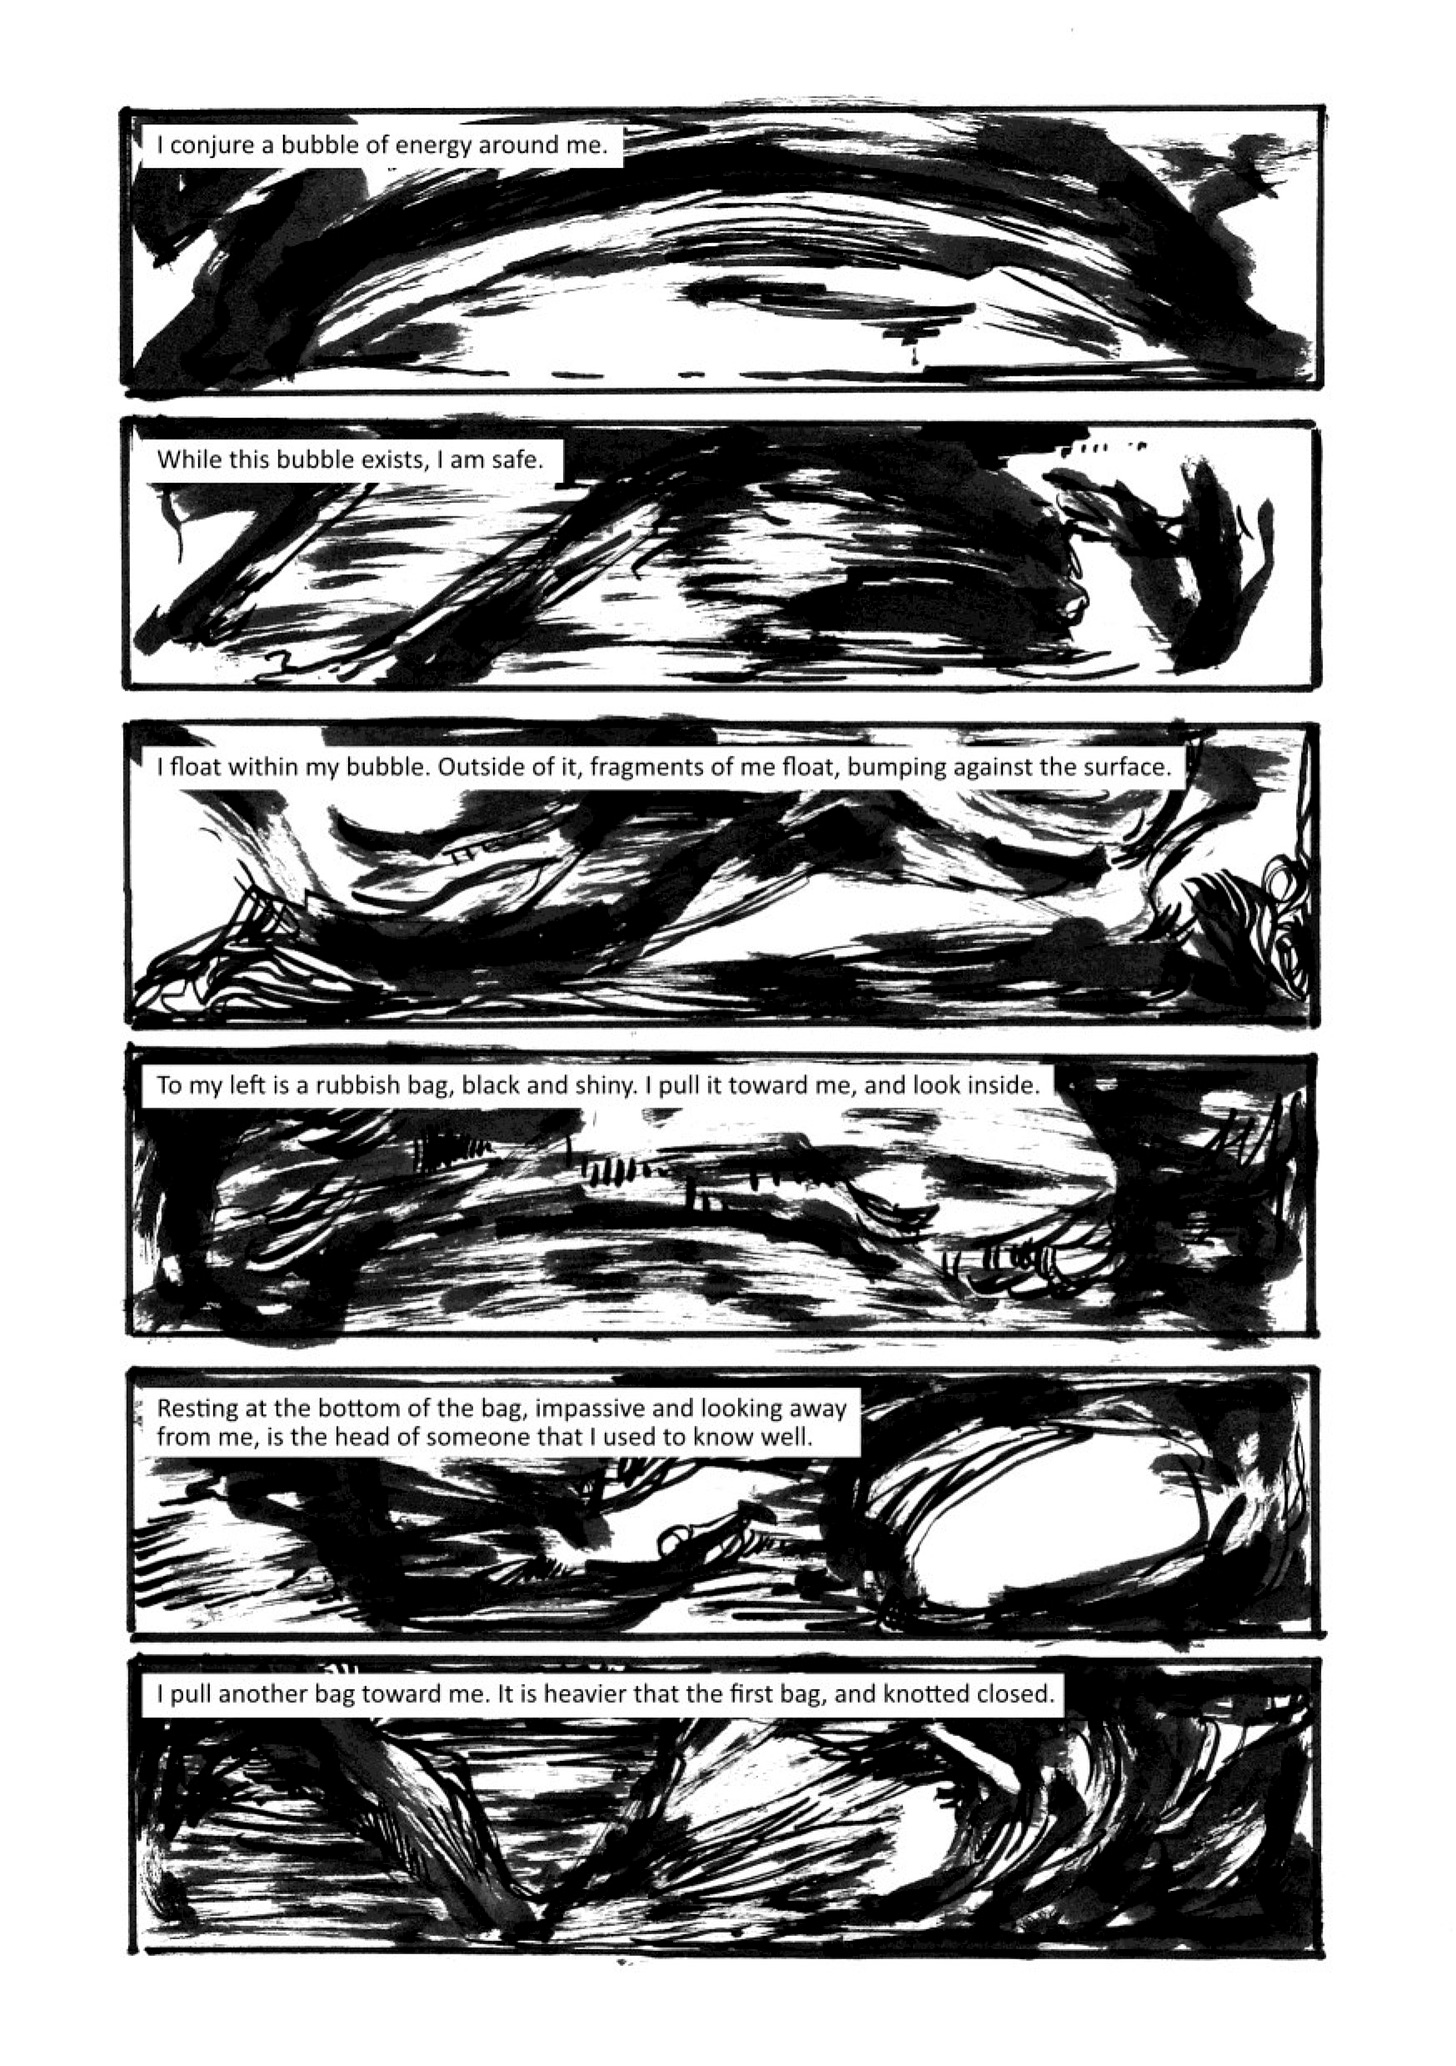 Across six panels, a story is told against a backdrop of inky swirls. The text says: 1/ I conjure a bubble of energy around me 2/While this bubble exists, I am safe. 3/ I float within my bubble. Outside of it, fragments of me float, bumping against the surface. 4/ To my left is a rubbish bag, black and shiny. I pull it toward me, and look inside. 5/ Resting at the bottom of the bag, impassive and looking away from me, is the head of someone that I used to know well. 6/ I pull another bag toward me. It is heavier that the first bag, and knotted closed.